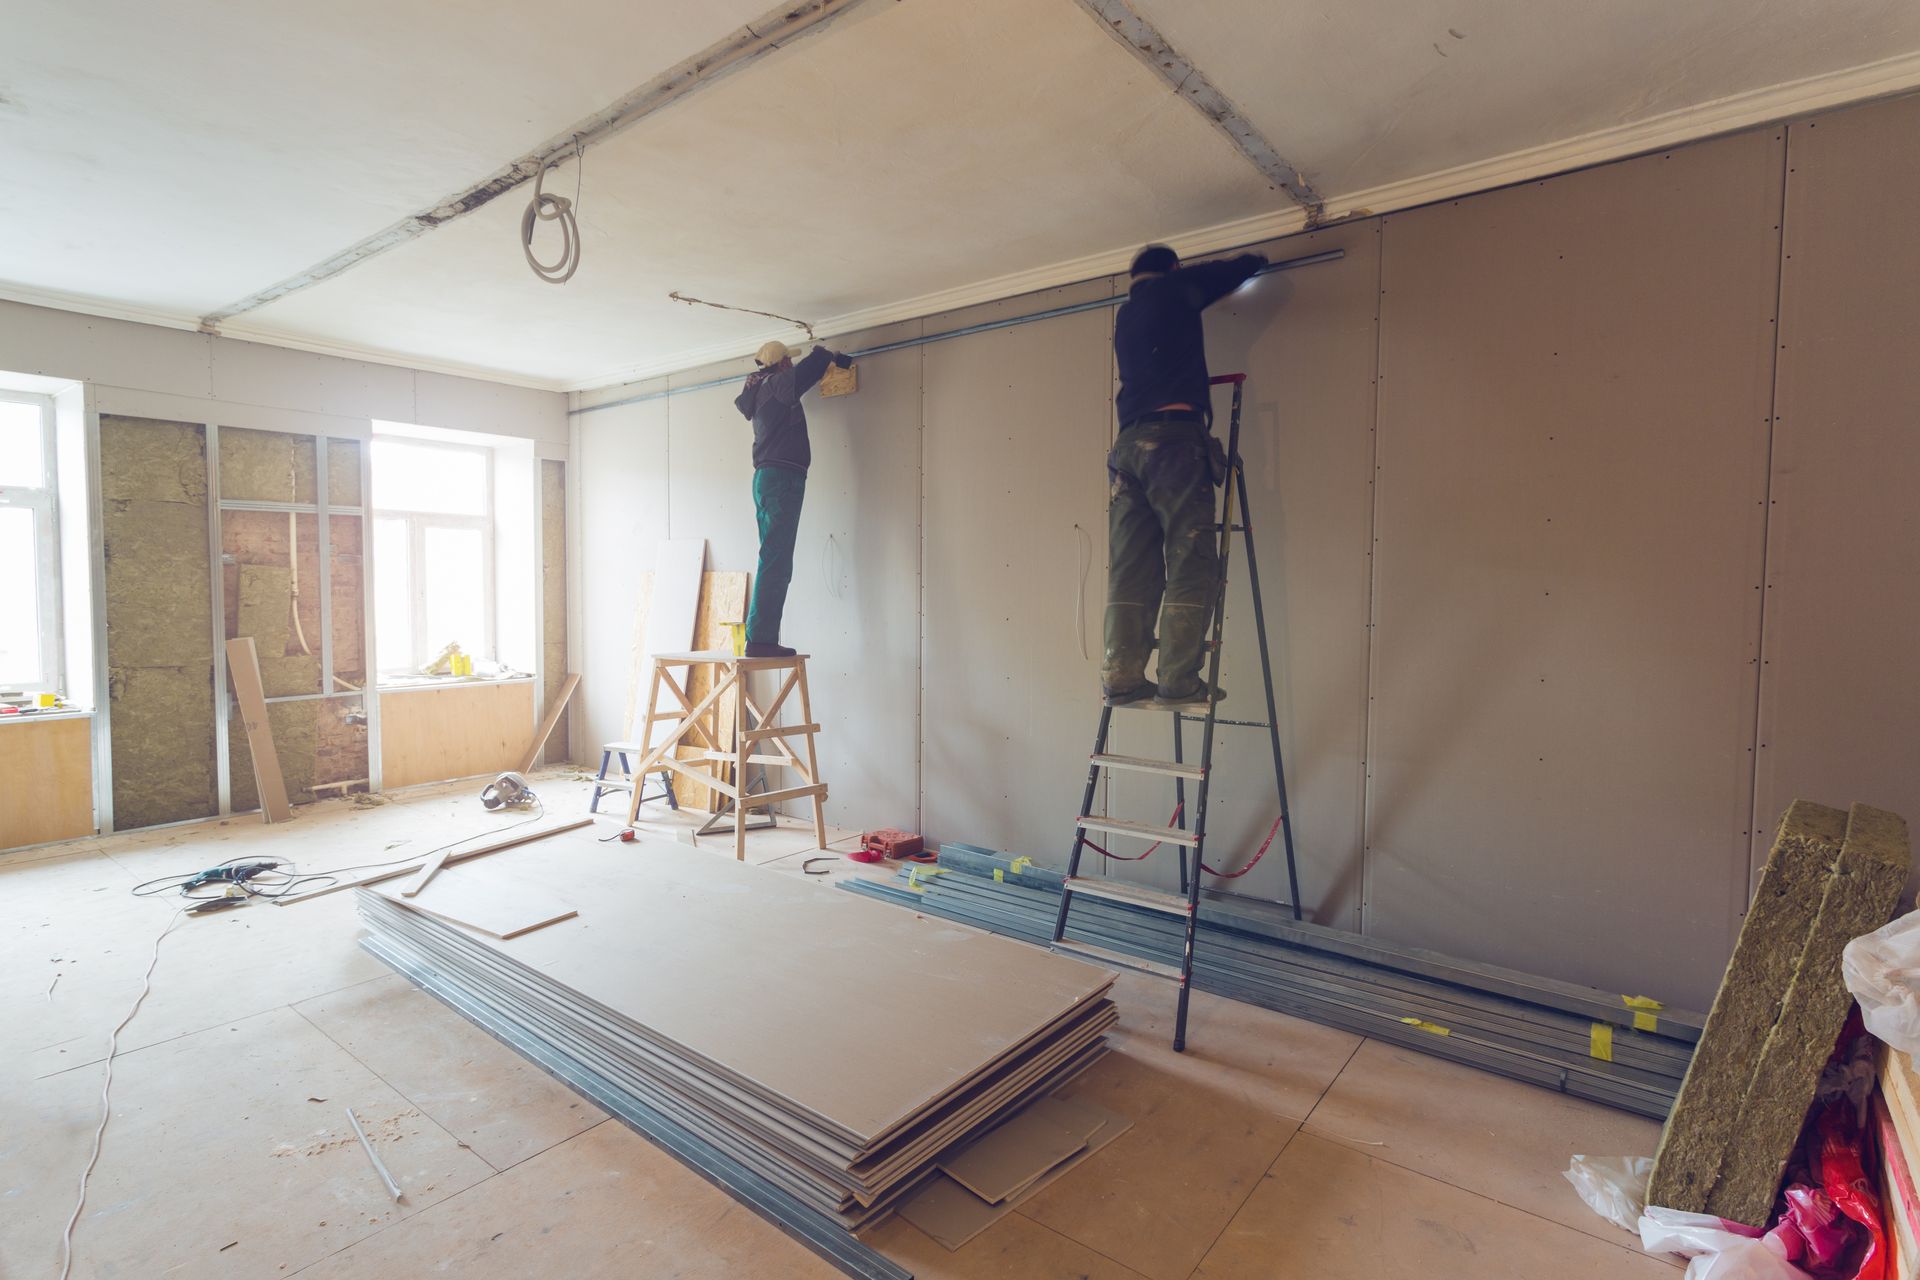 Workers are installing plasterboard 